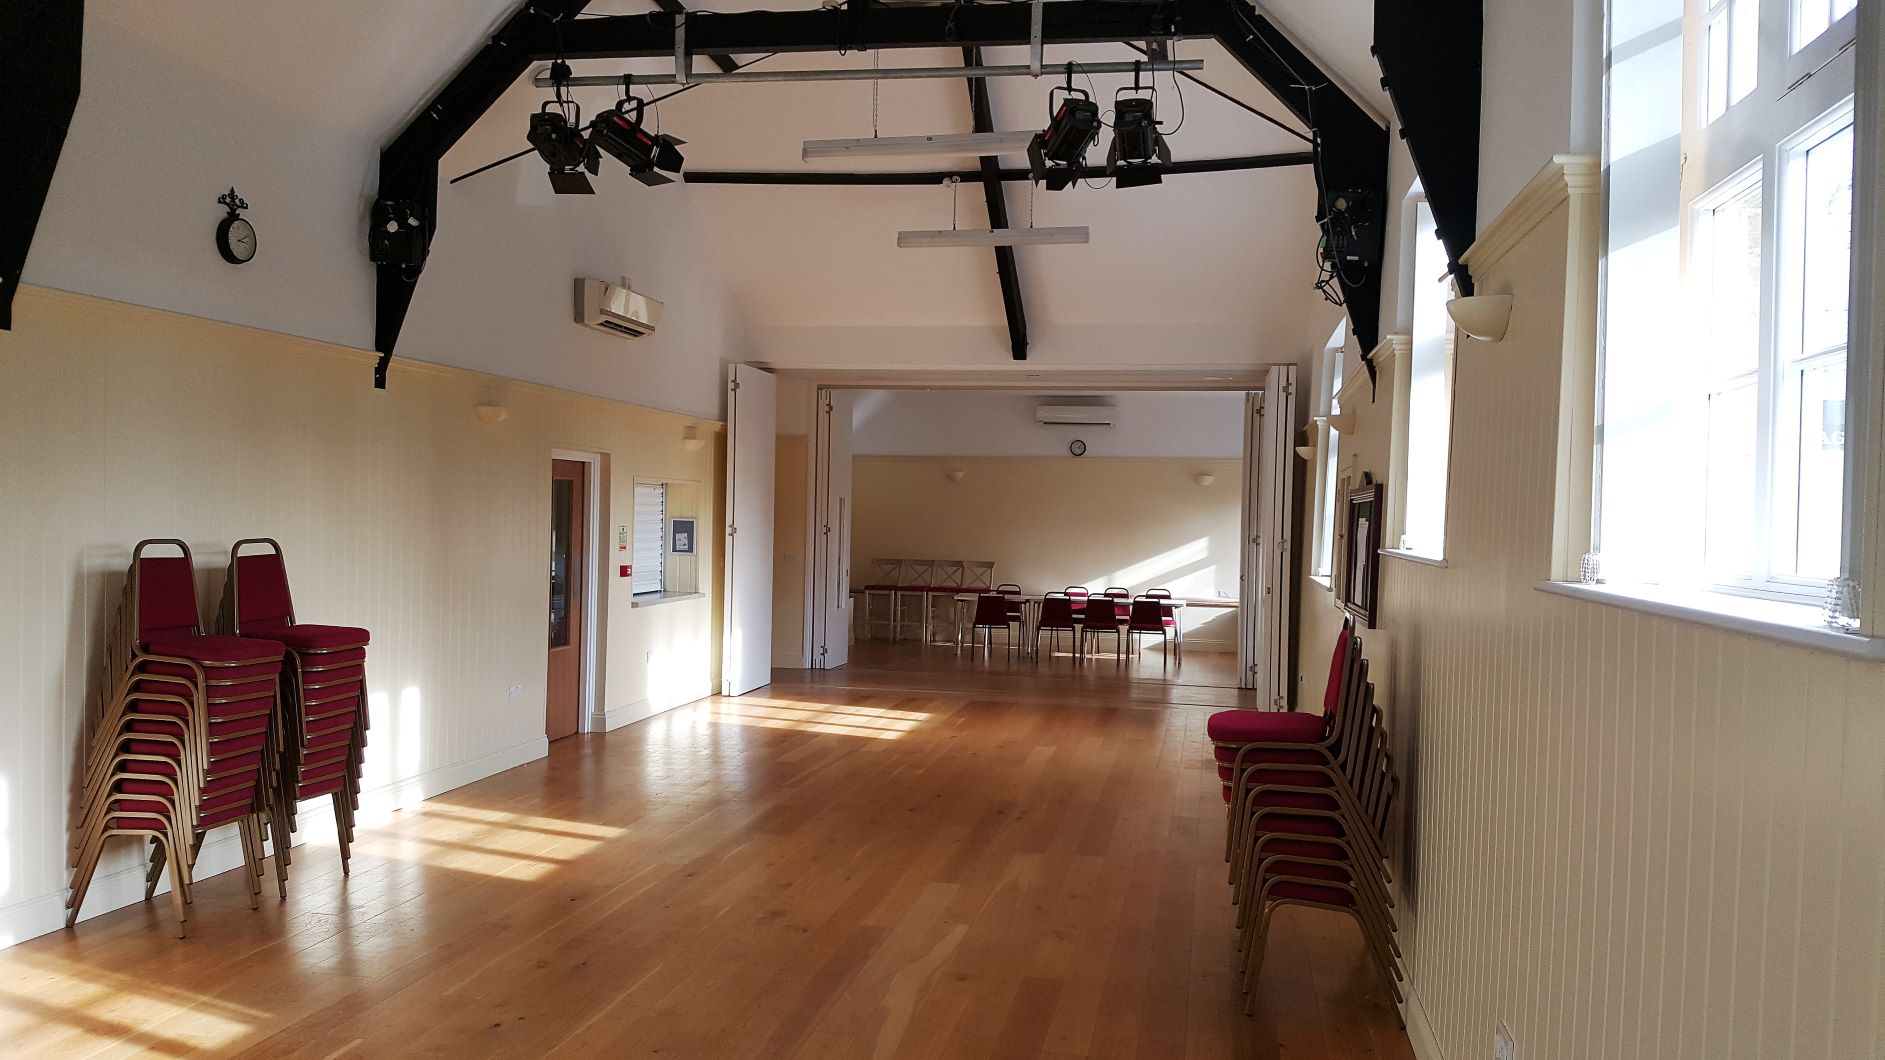 hall opened to the meeting room